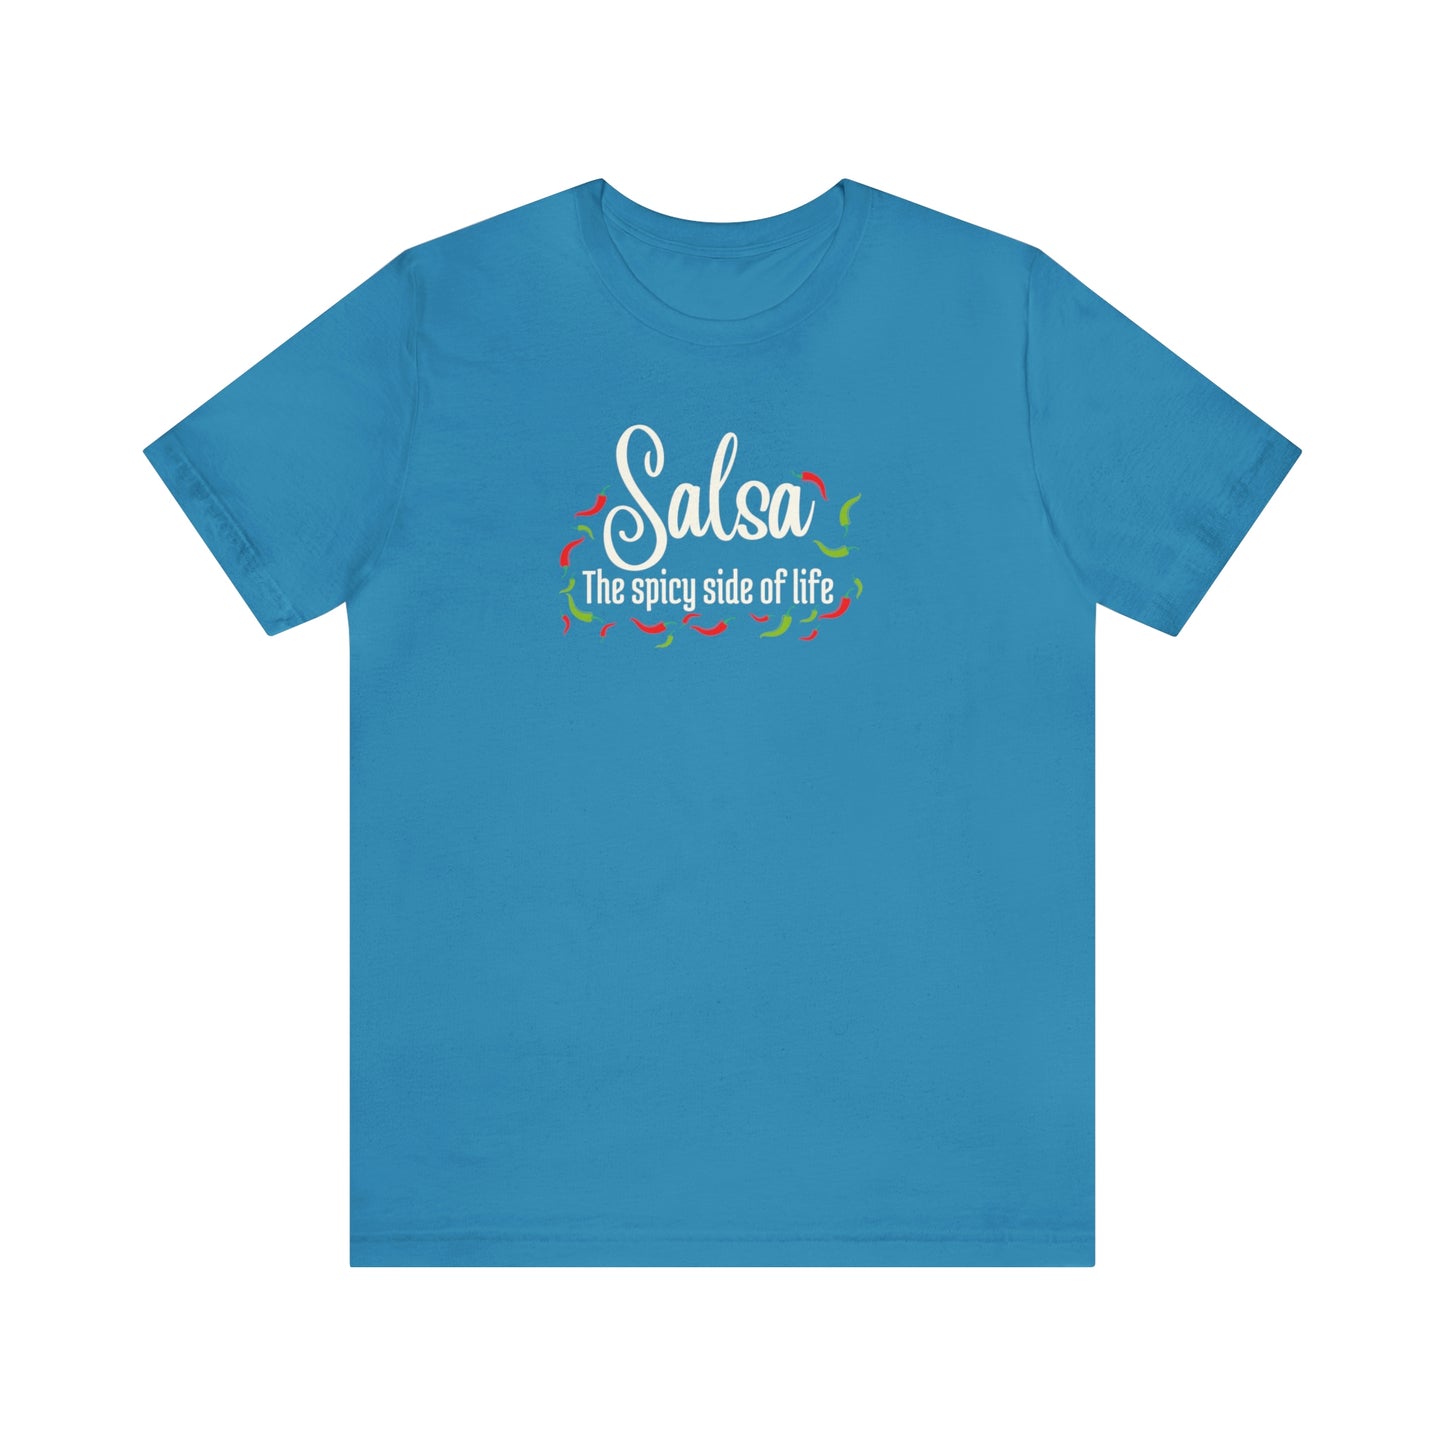 A T-shirt with the text "Salsa the spicy side of life" and lots of pictures of small chilis surrounding it